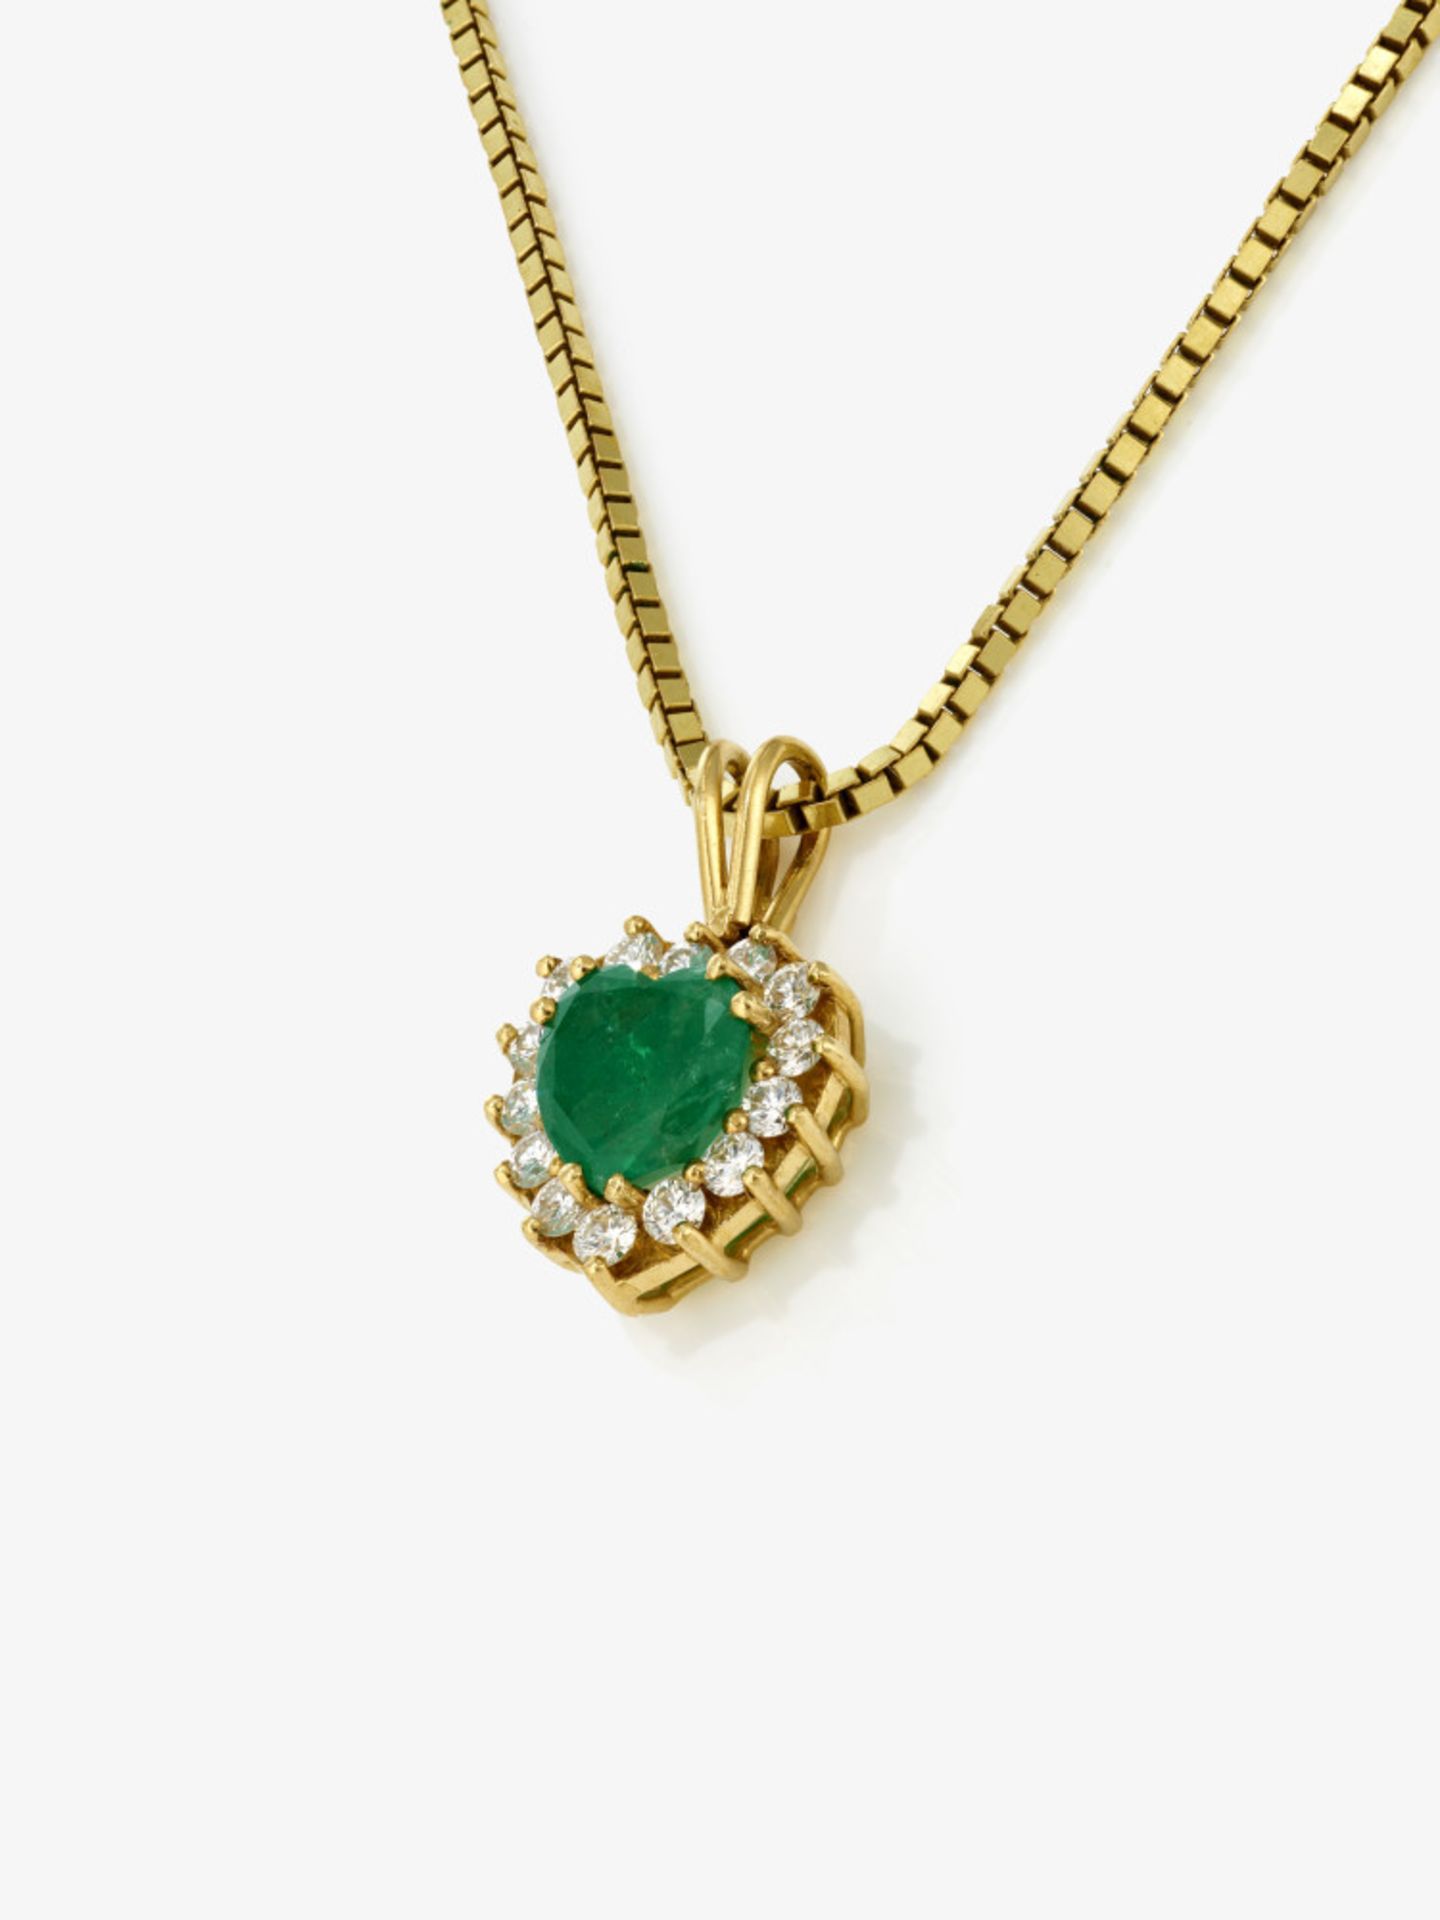 An emerald and brilliant-cut diamond pendant with a fine Venetian necklace - Image 2 of 2